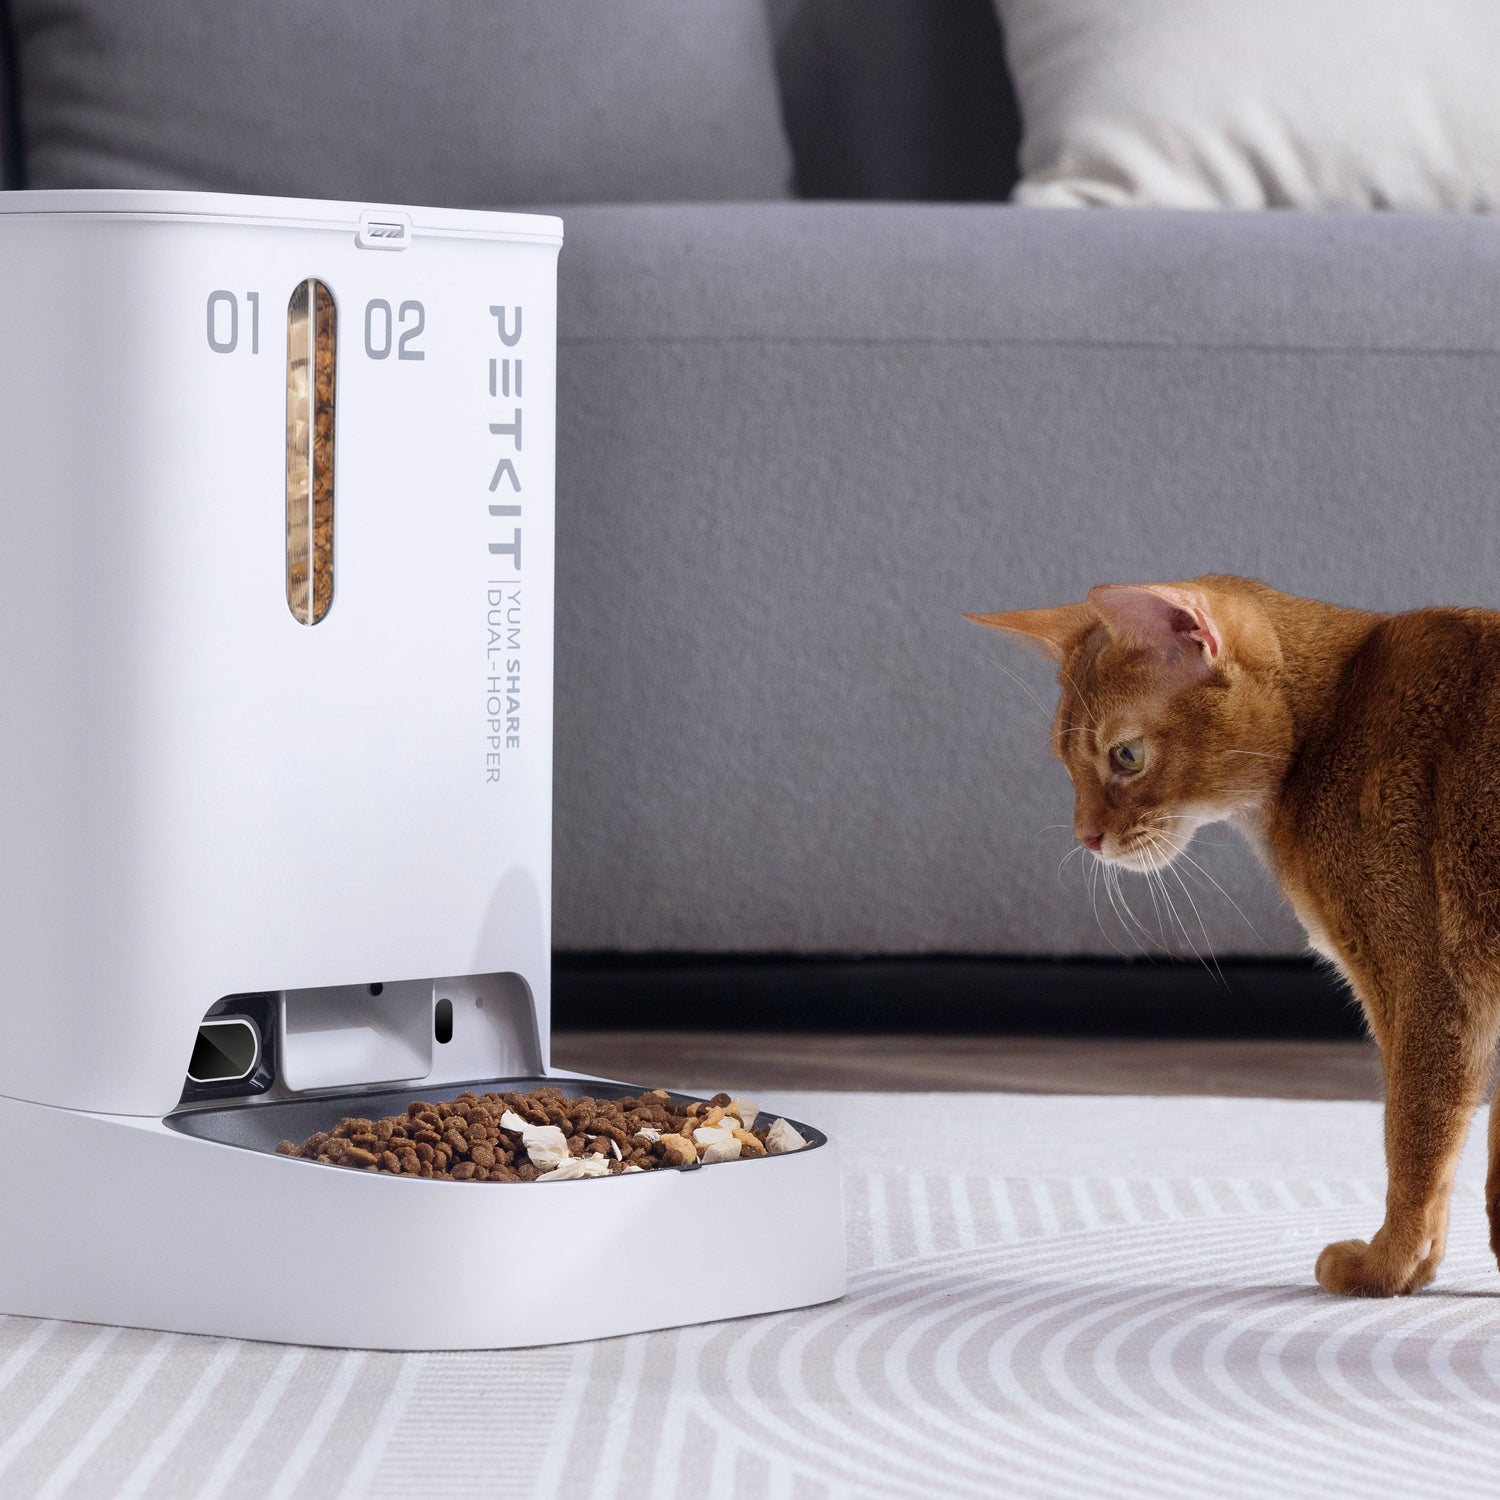 PETKIT Yumshare Dual Hopper Smart Feeder with Built-in Camera